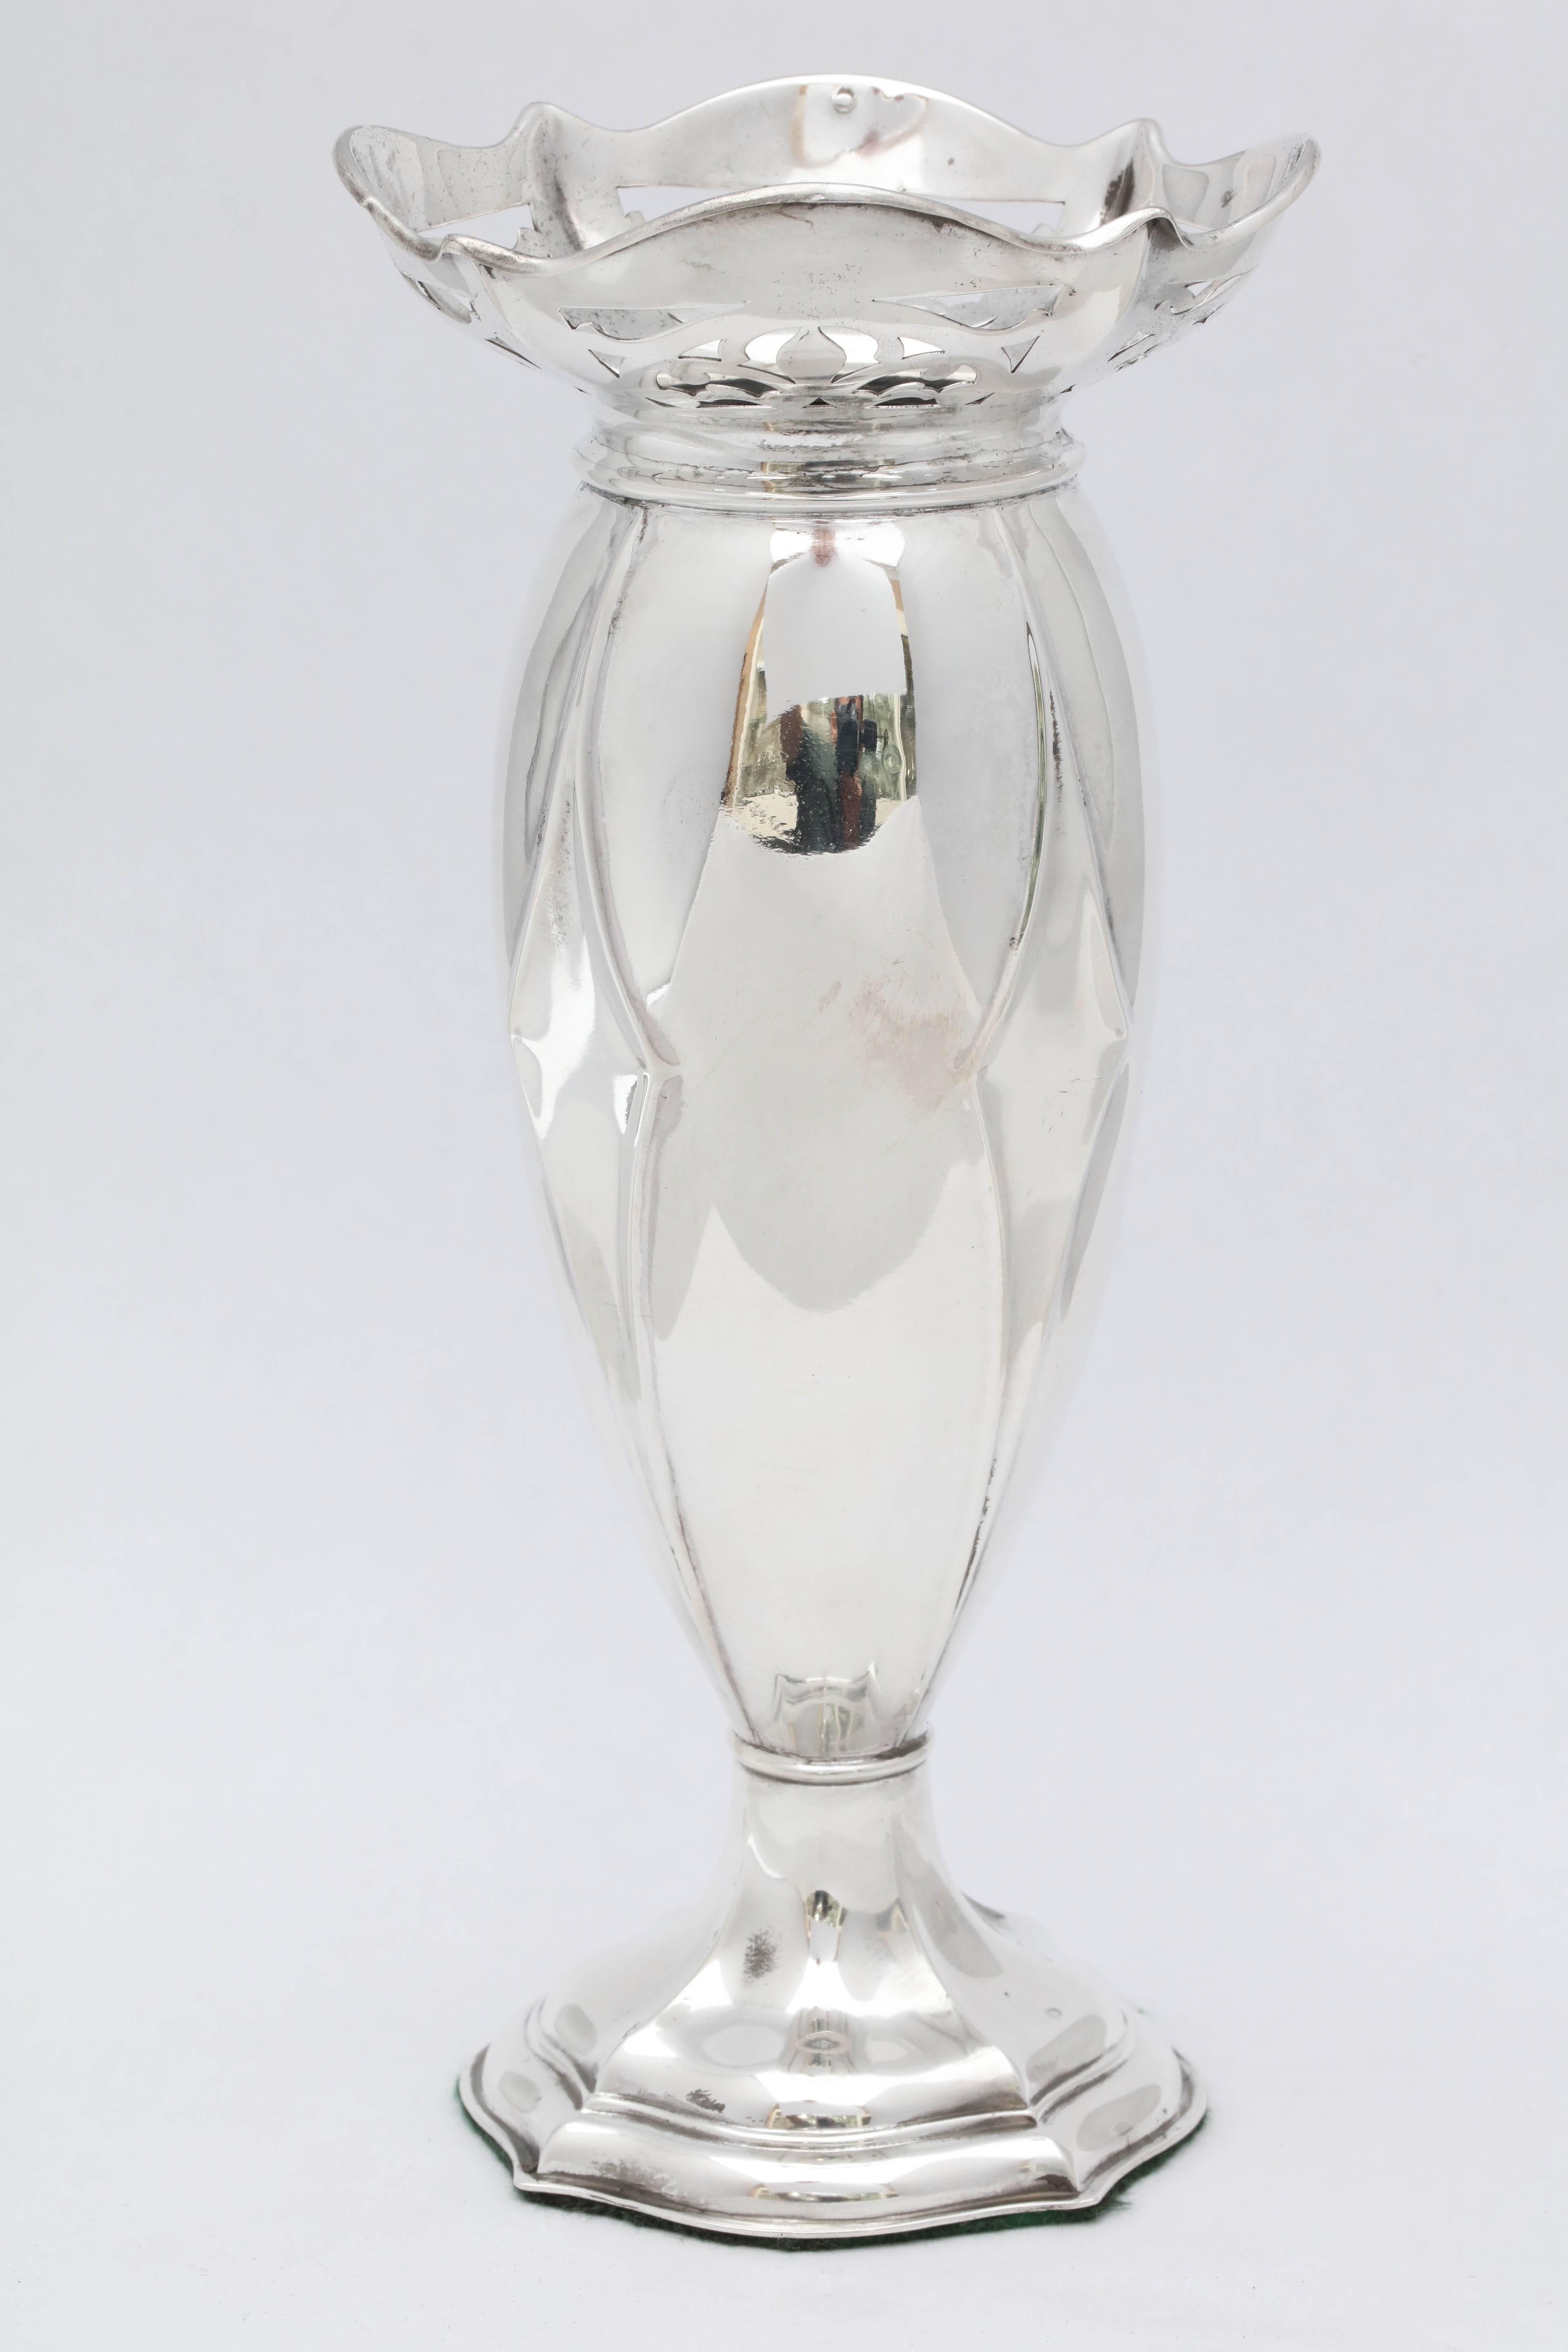 Sterling silver, Art Deco period vase, Birmingham, England, Alexander Clark and Co., Ltd. Has a French import mark also. A little less than 7 3/4 inches high x 3 1/2 inches diameter across top x 3 inches diameter across weighted base. Pierced design